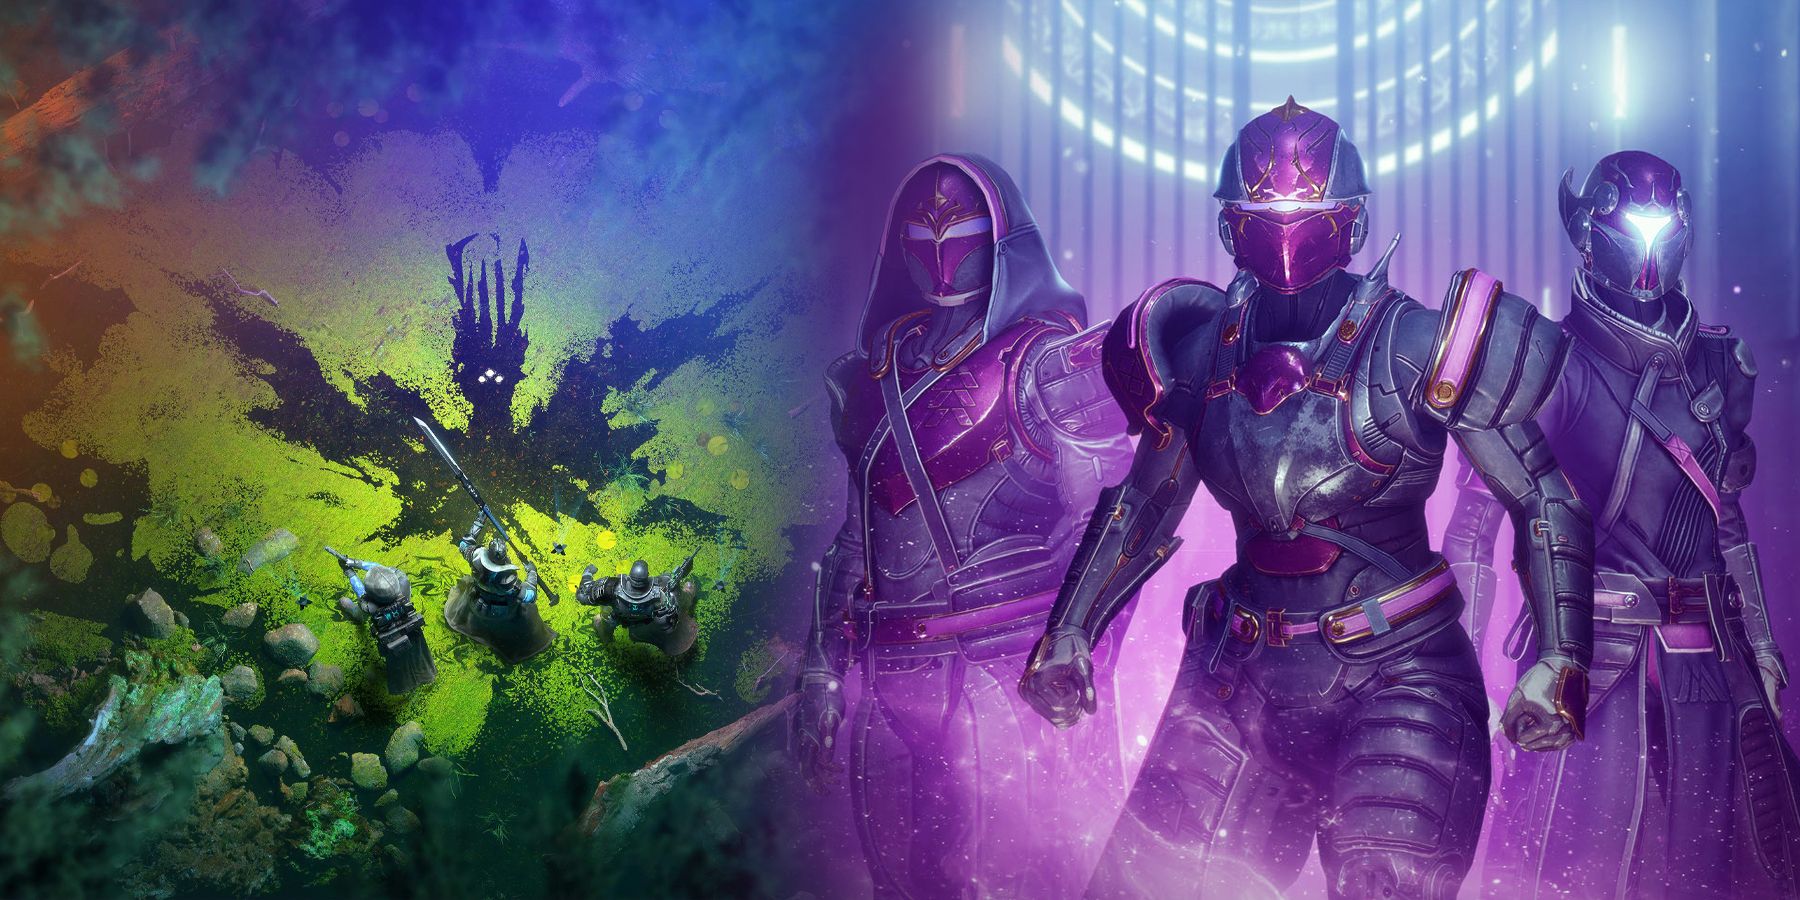 A colorful image of Guardians in Destiny 2 wearing Season of the Lost armor on the right and a fireteam of three wading through the swamp of Savathun's throne world in the Witch Queen expansion with her silhouette in the mossy water.